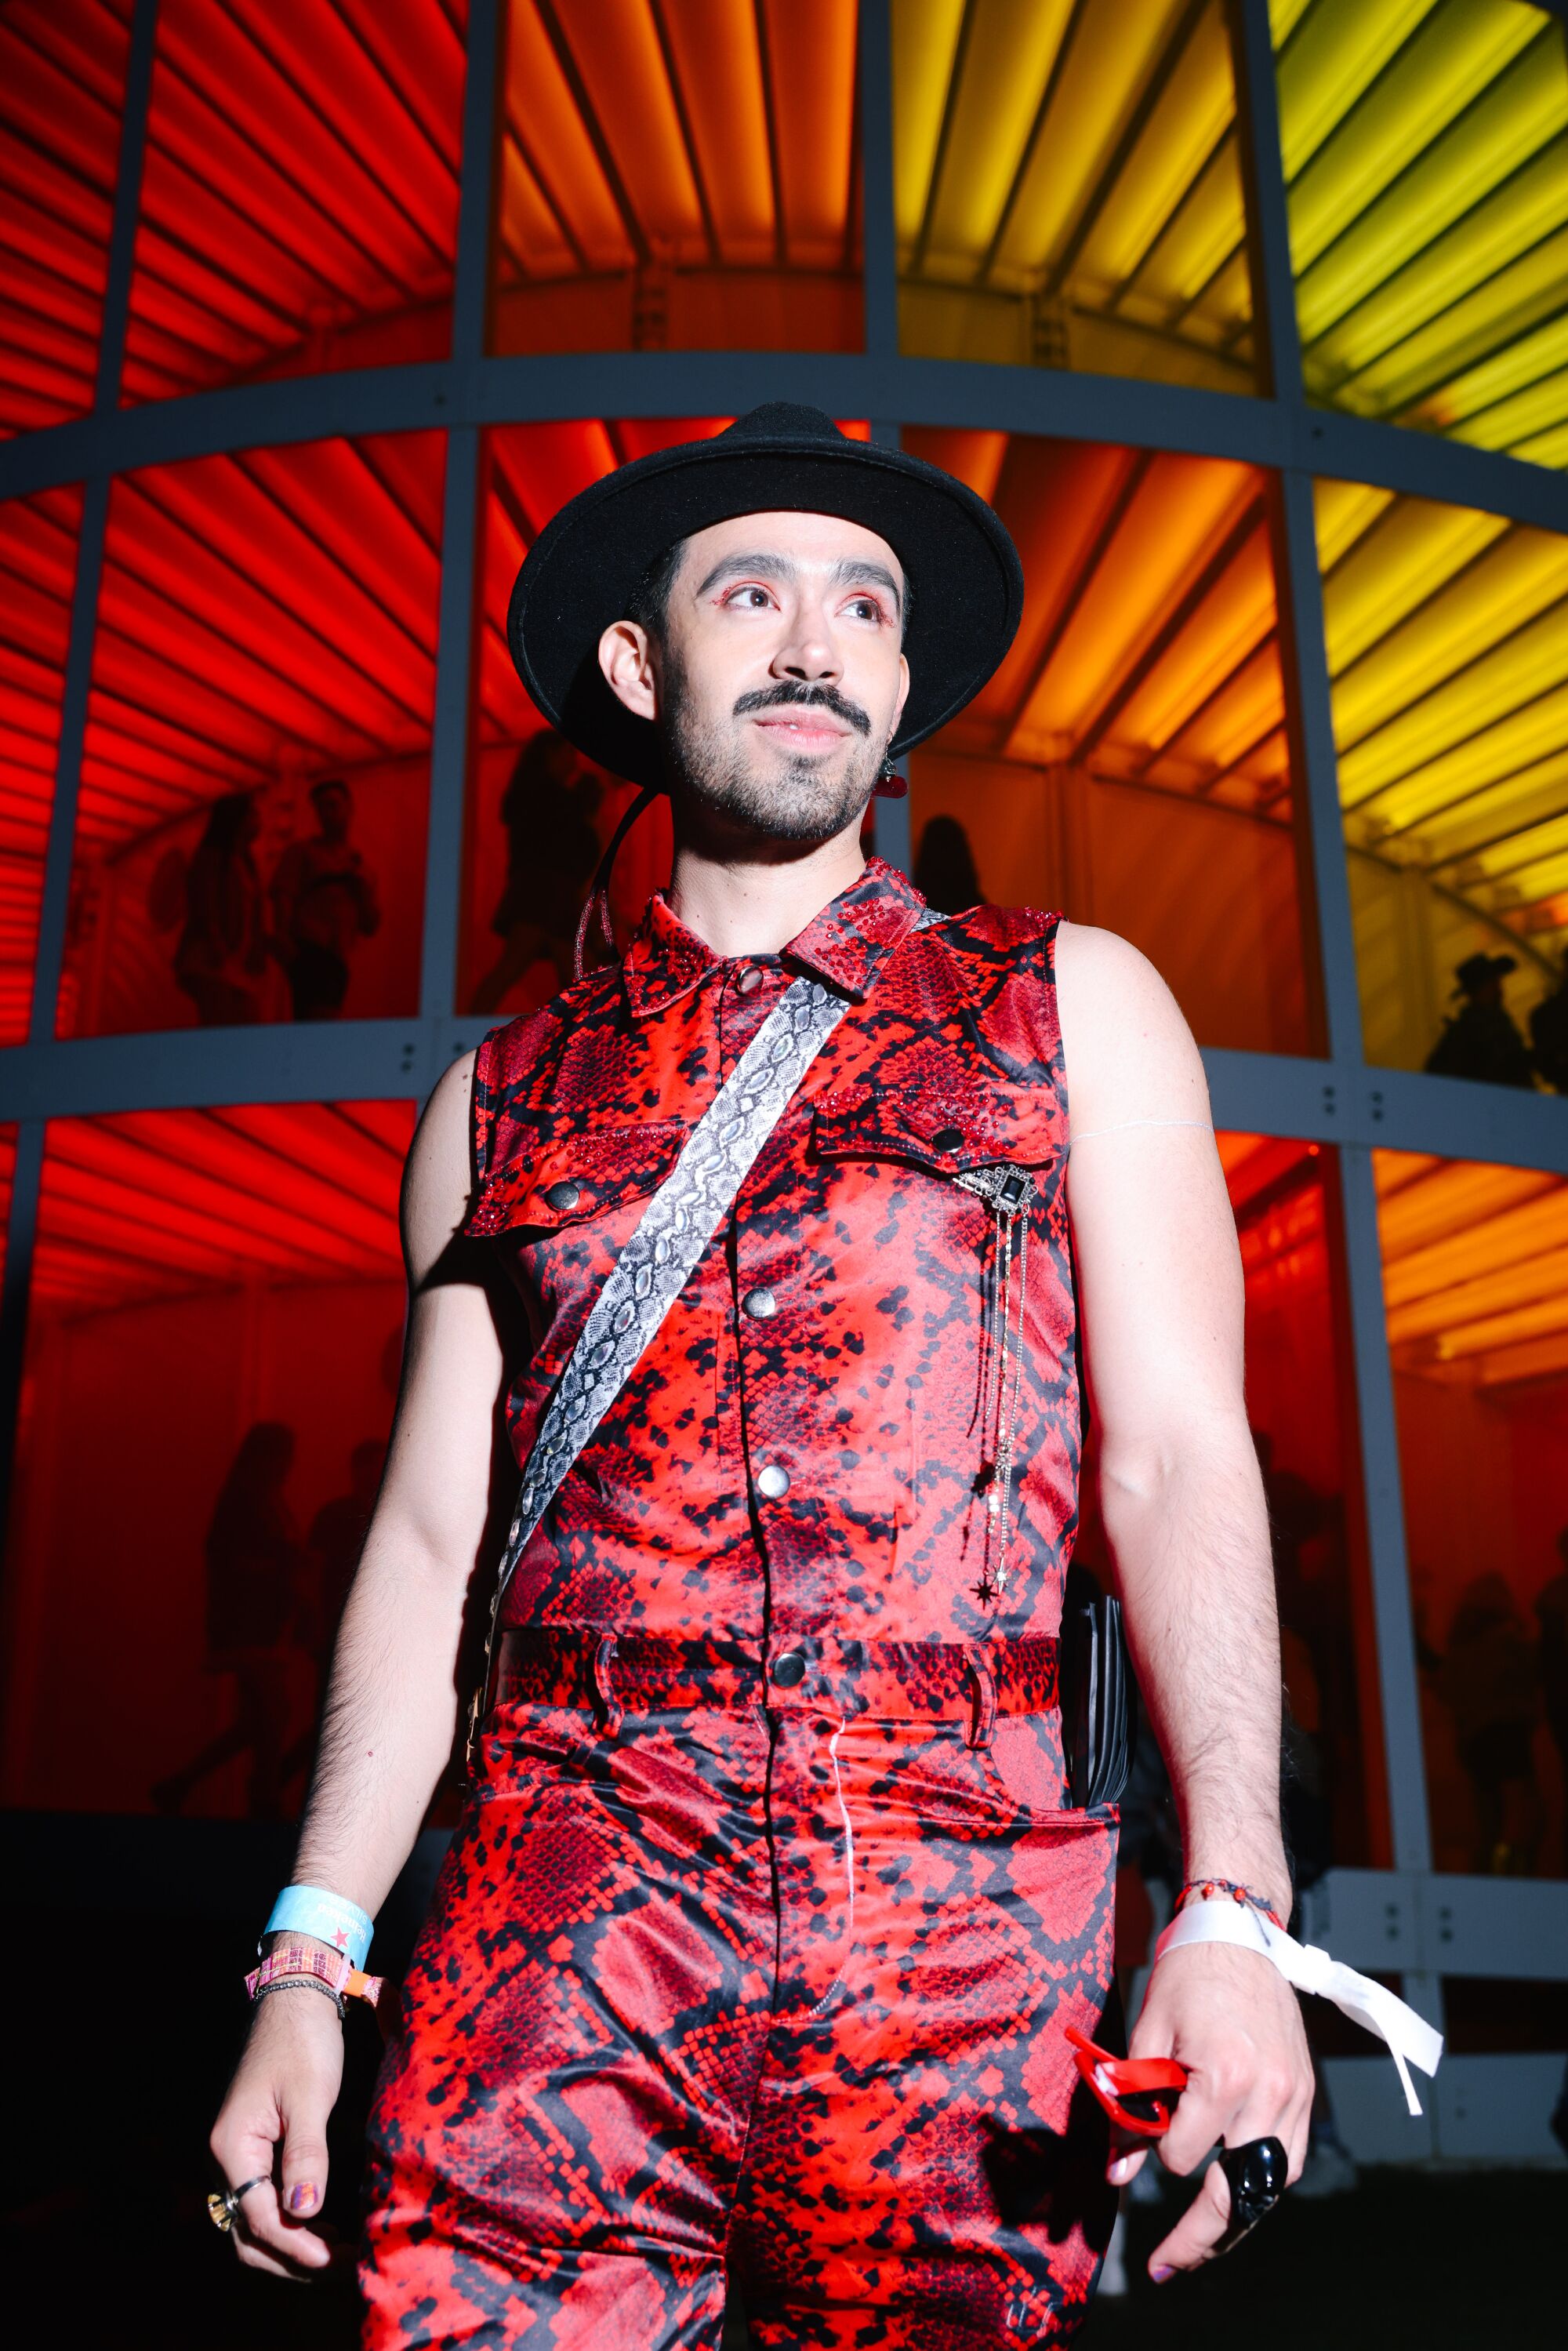 A Coachella attendee in a red snakeskin jumpsuit.